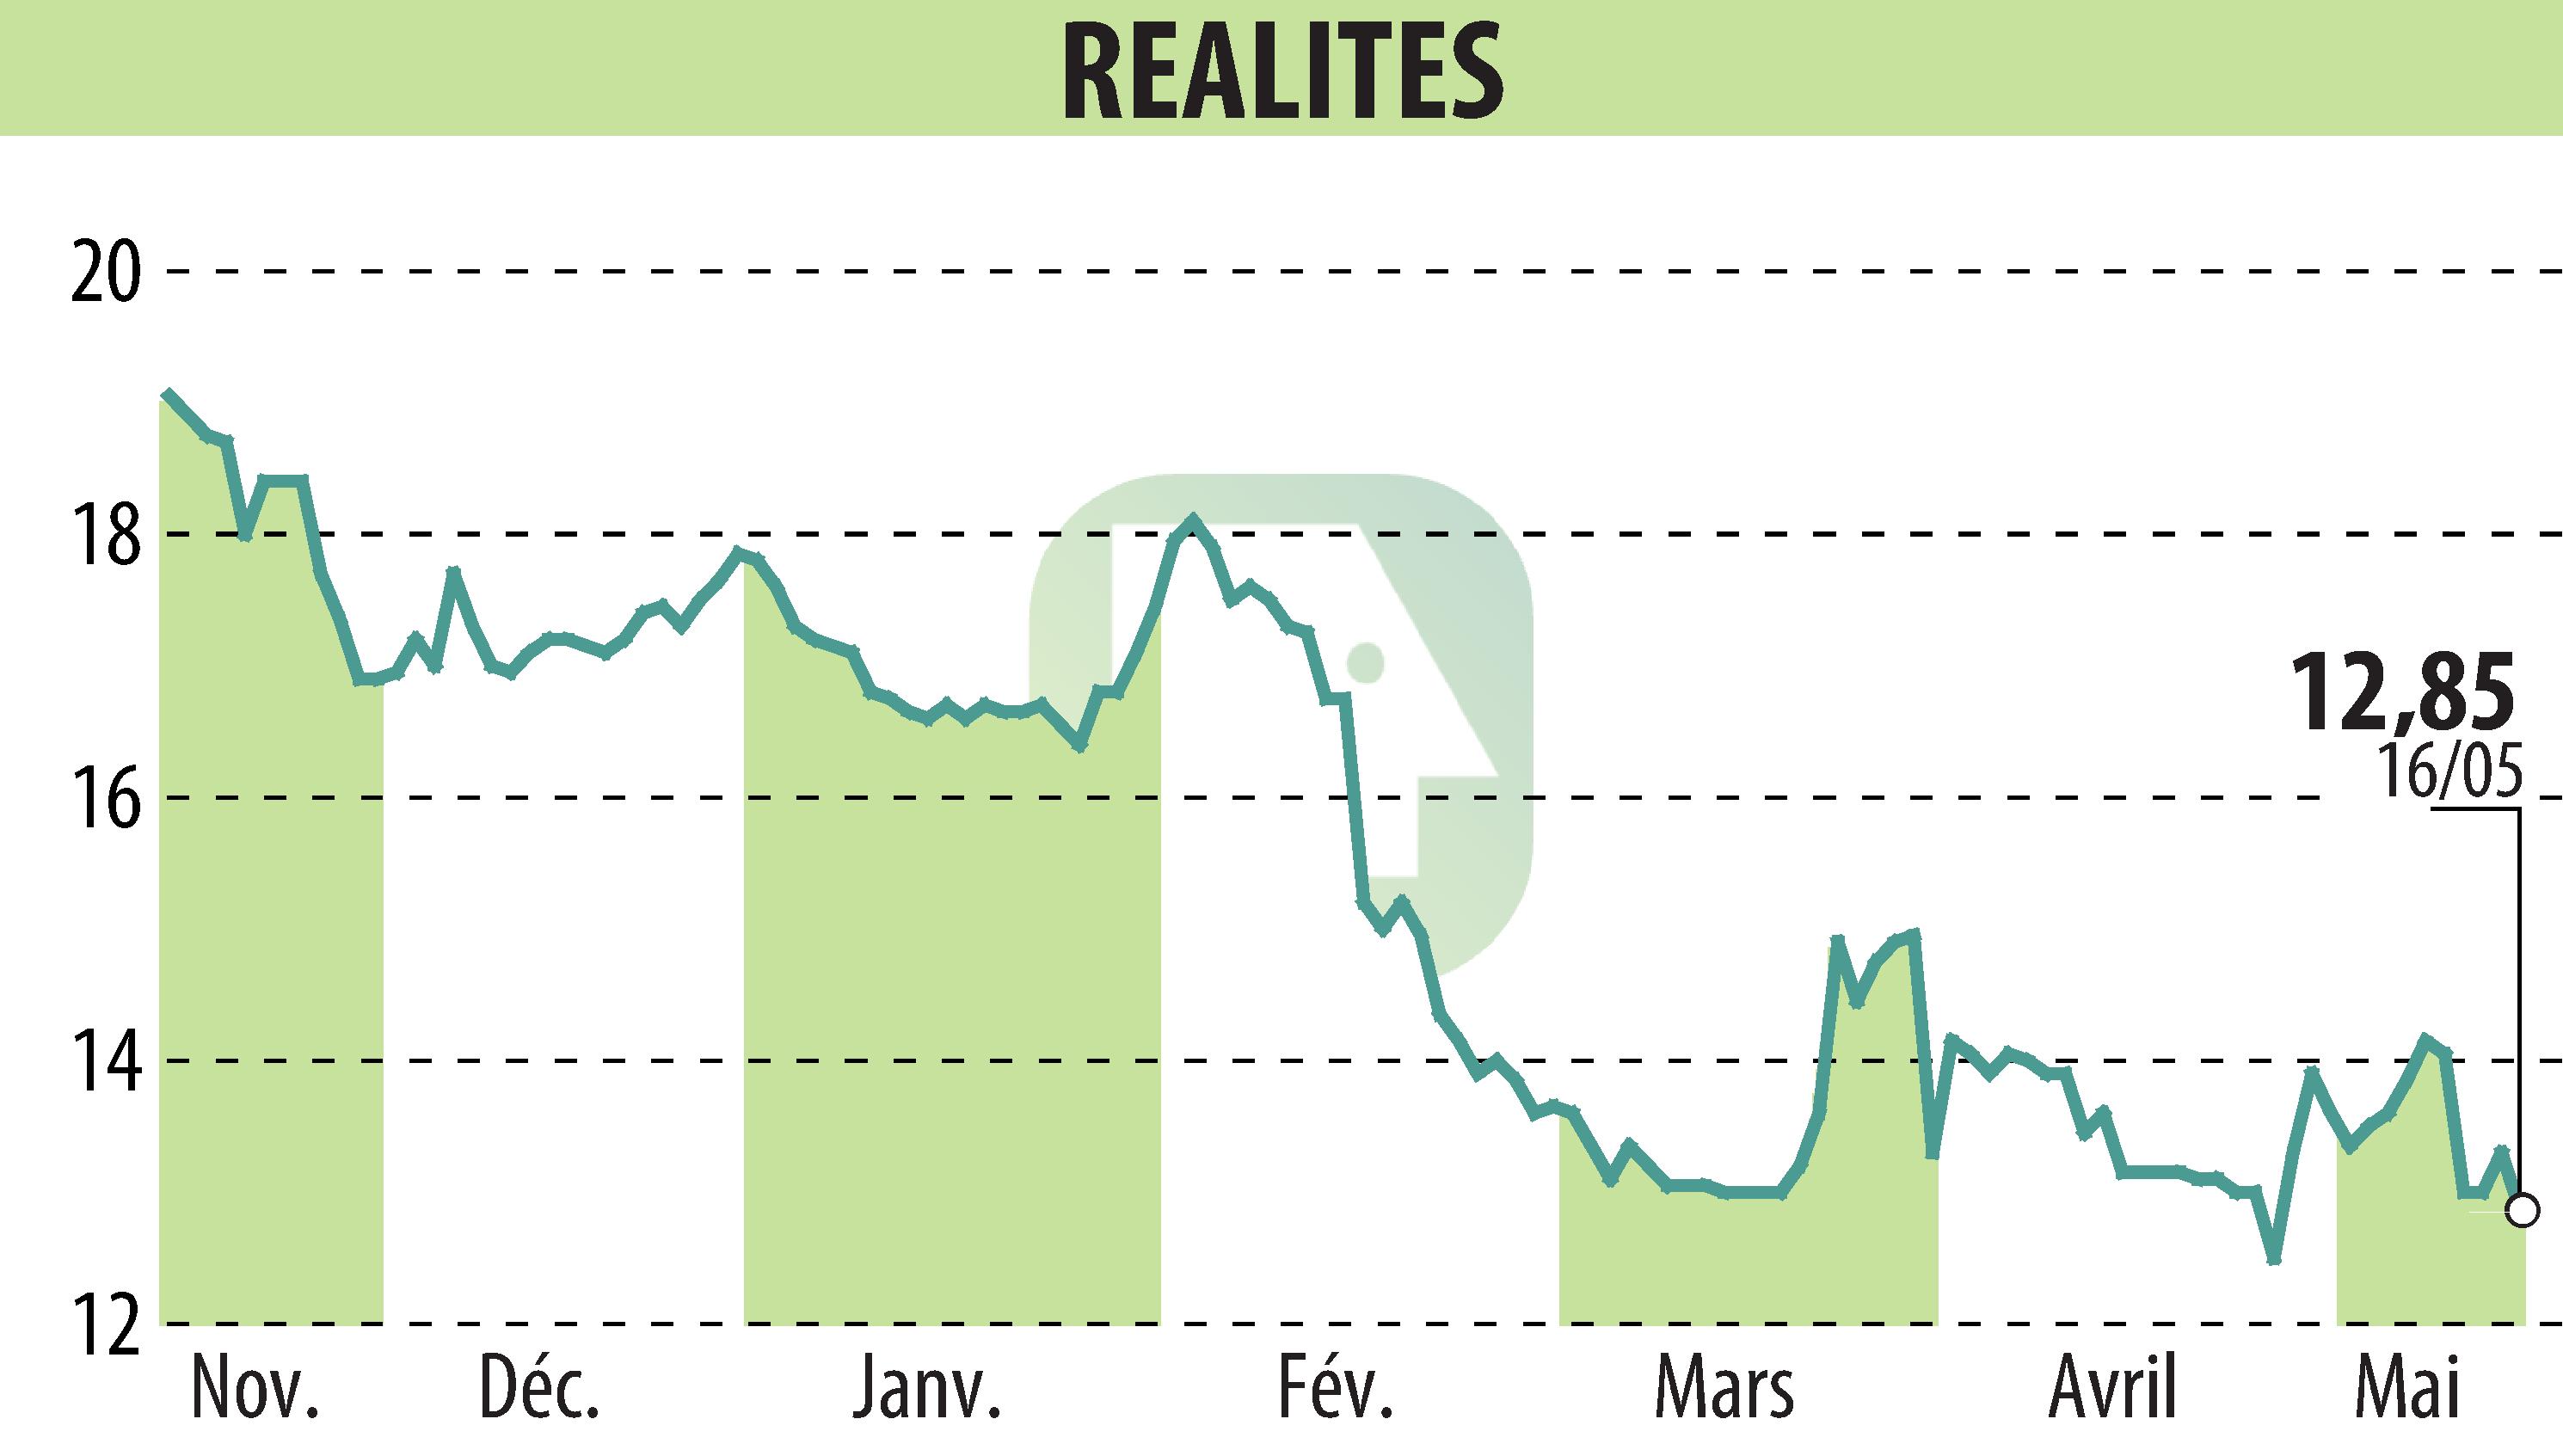 Stock price chart of REALITES (EPA:ALREA) showing fluctuations.